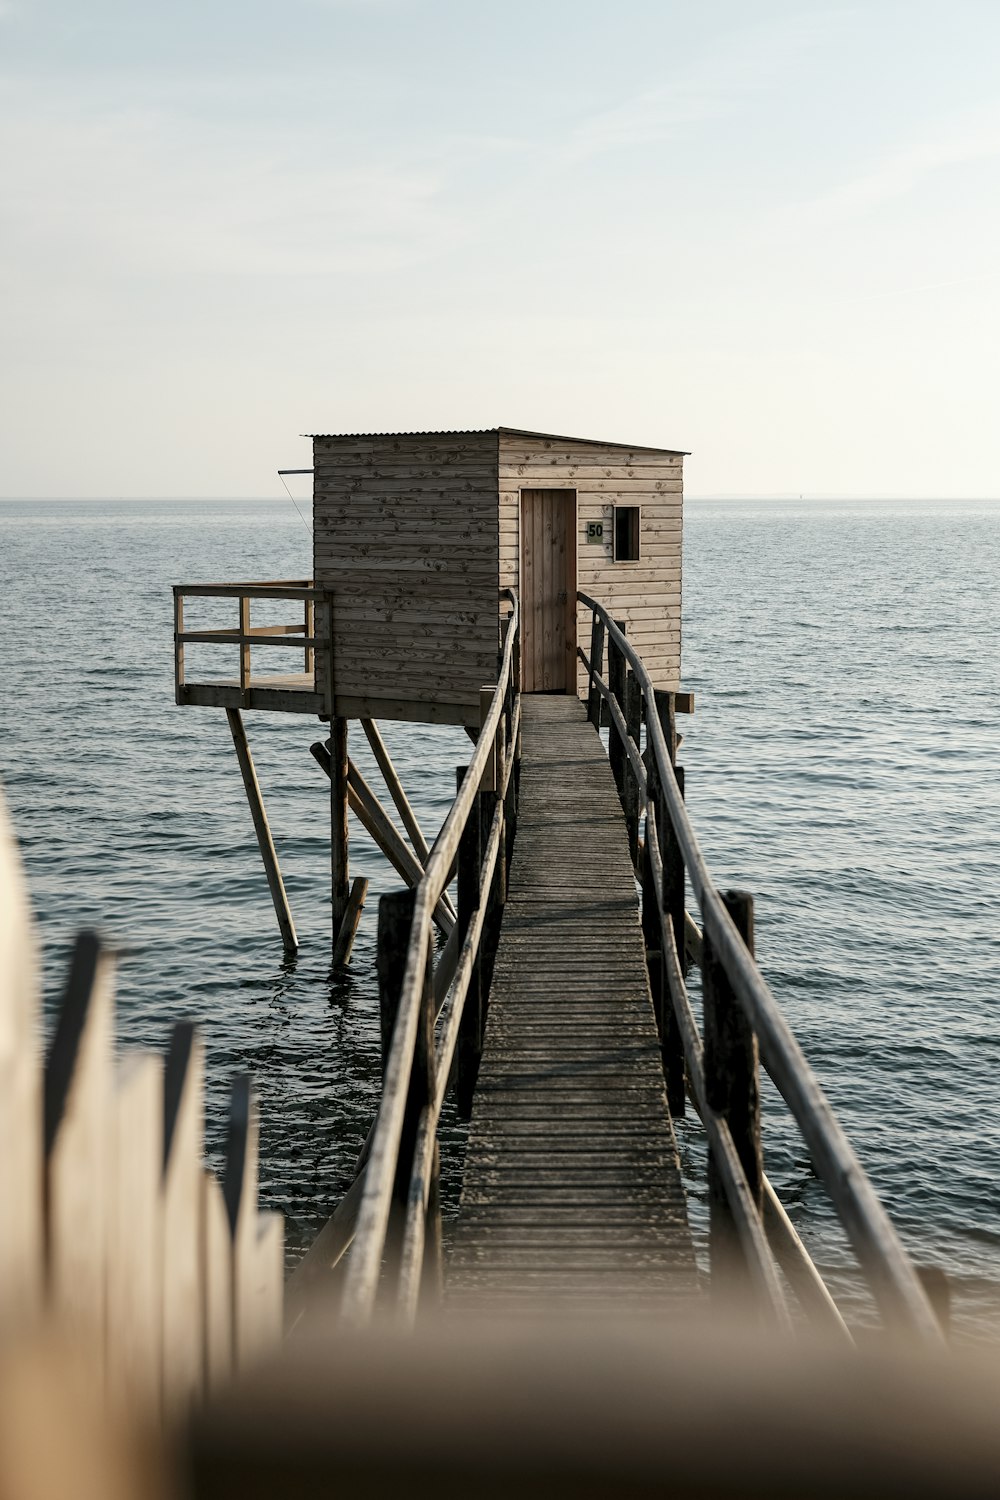 a wooden dock with a small house on it